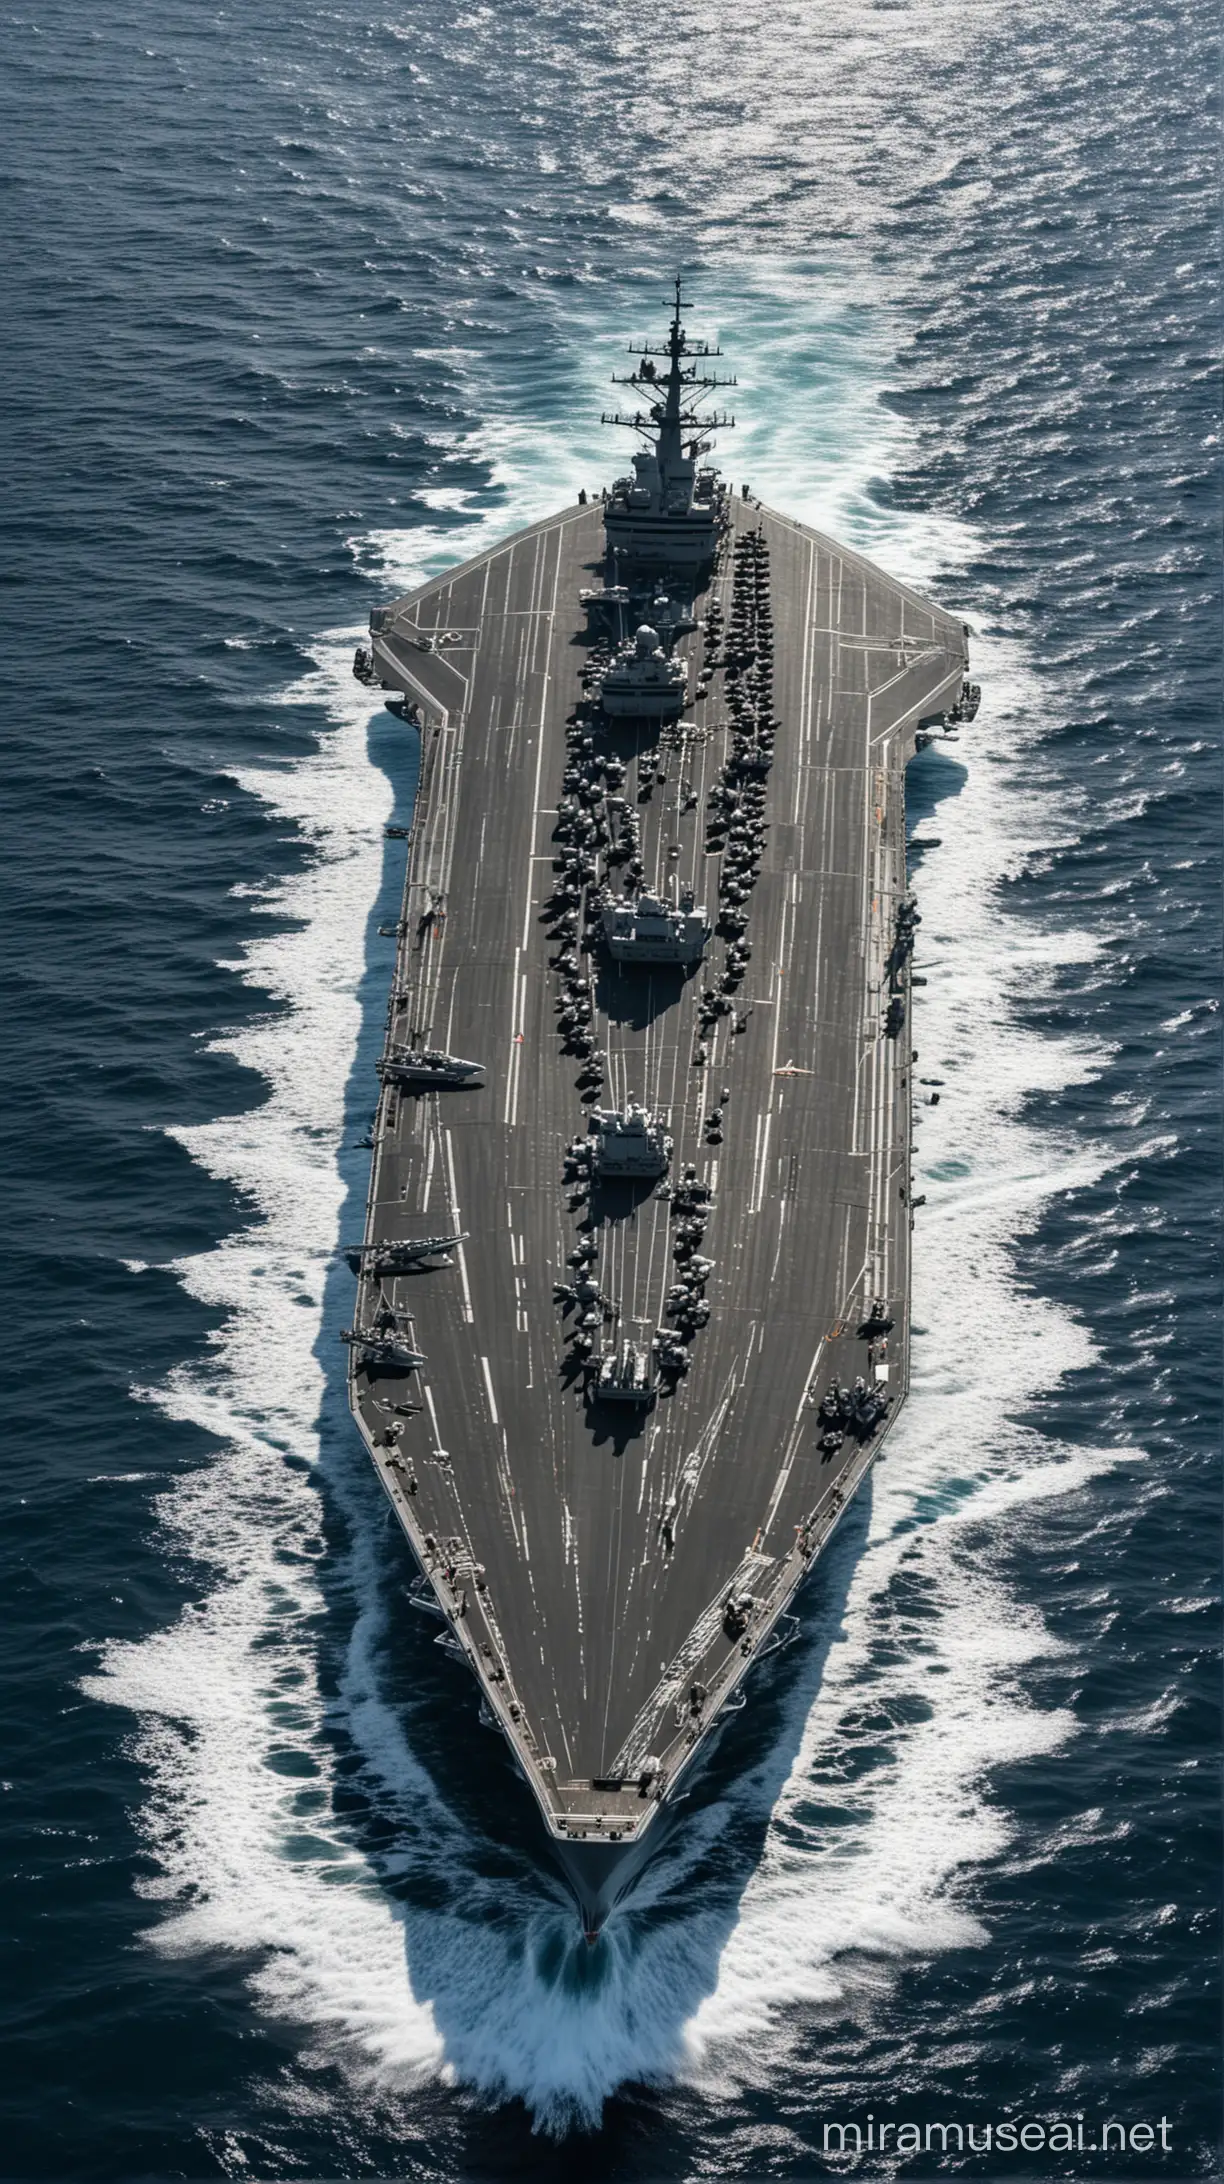 Aircraft carrier in the ocean